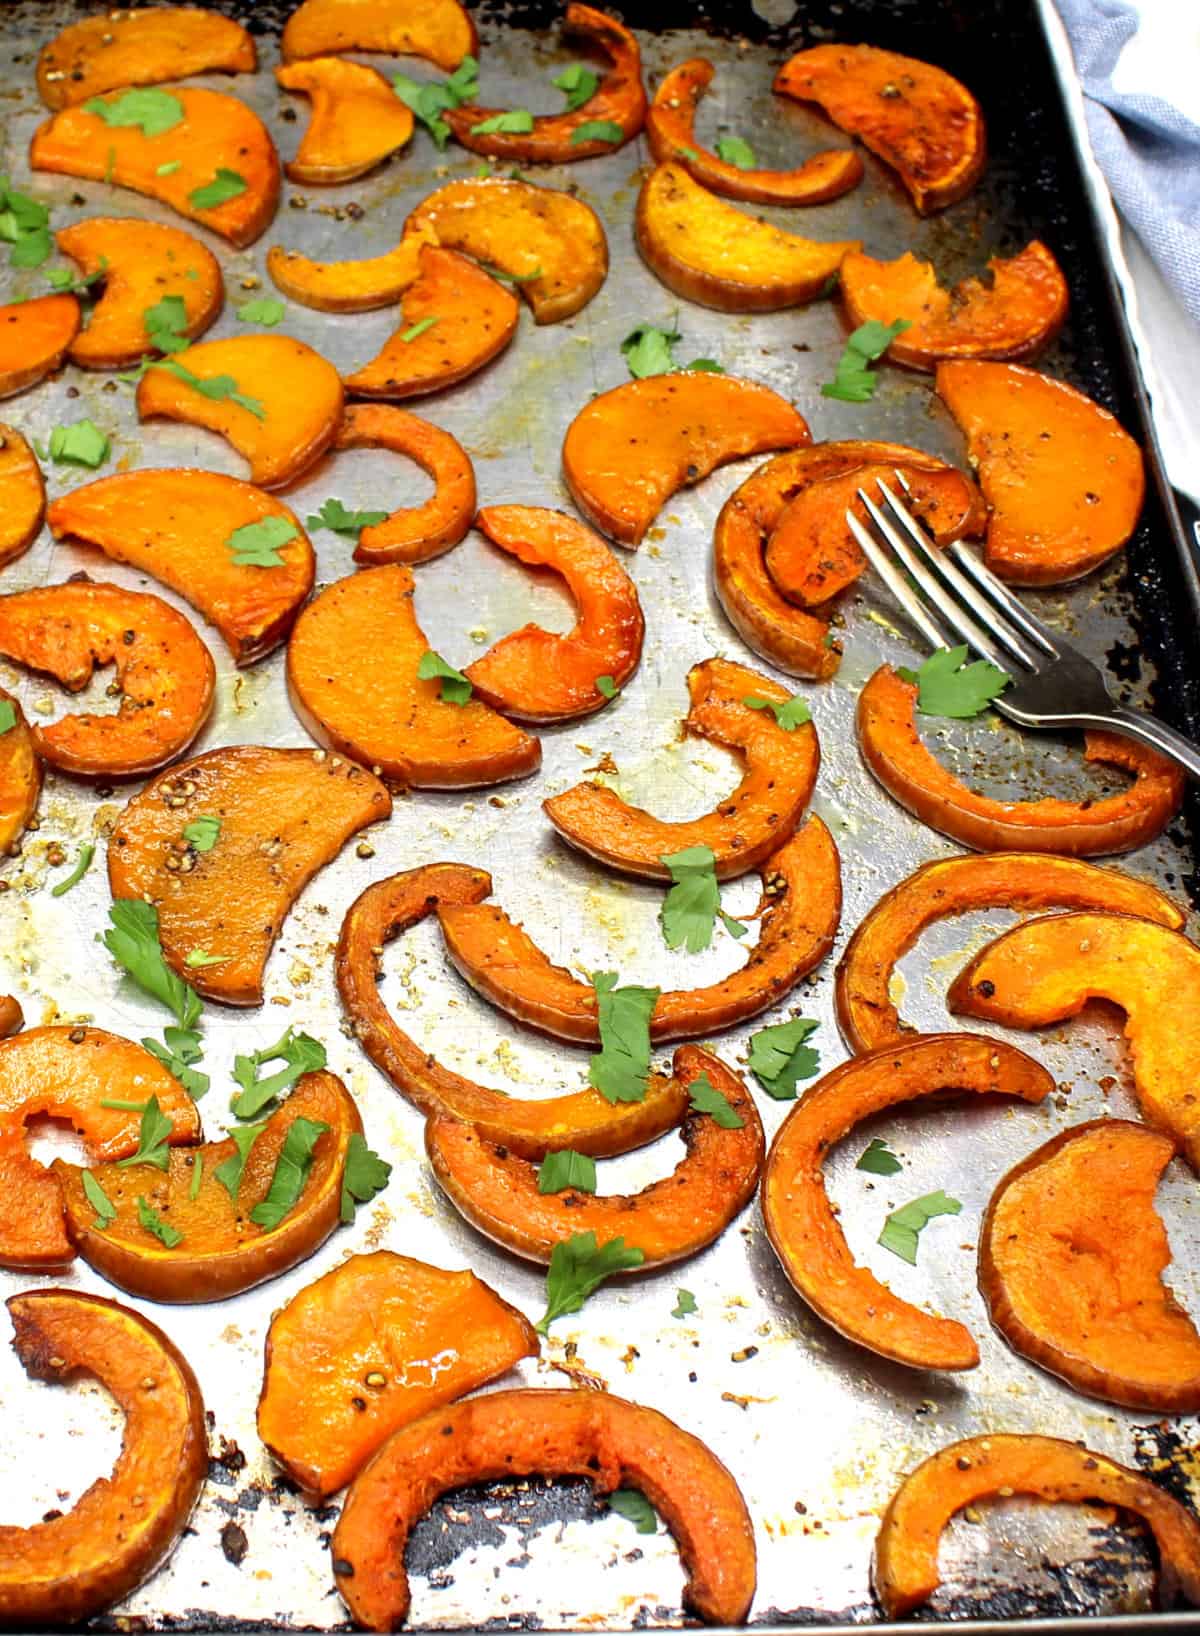 Slices of roasted butternut squash on baking sheet with fork.